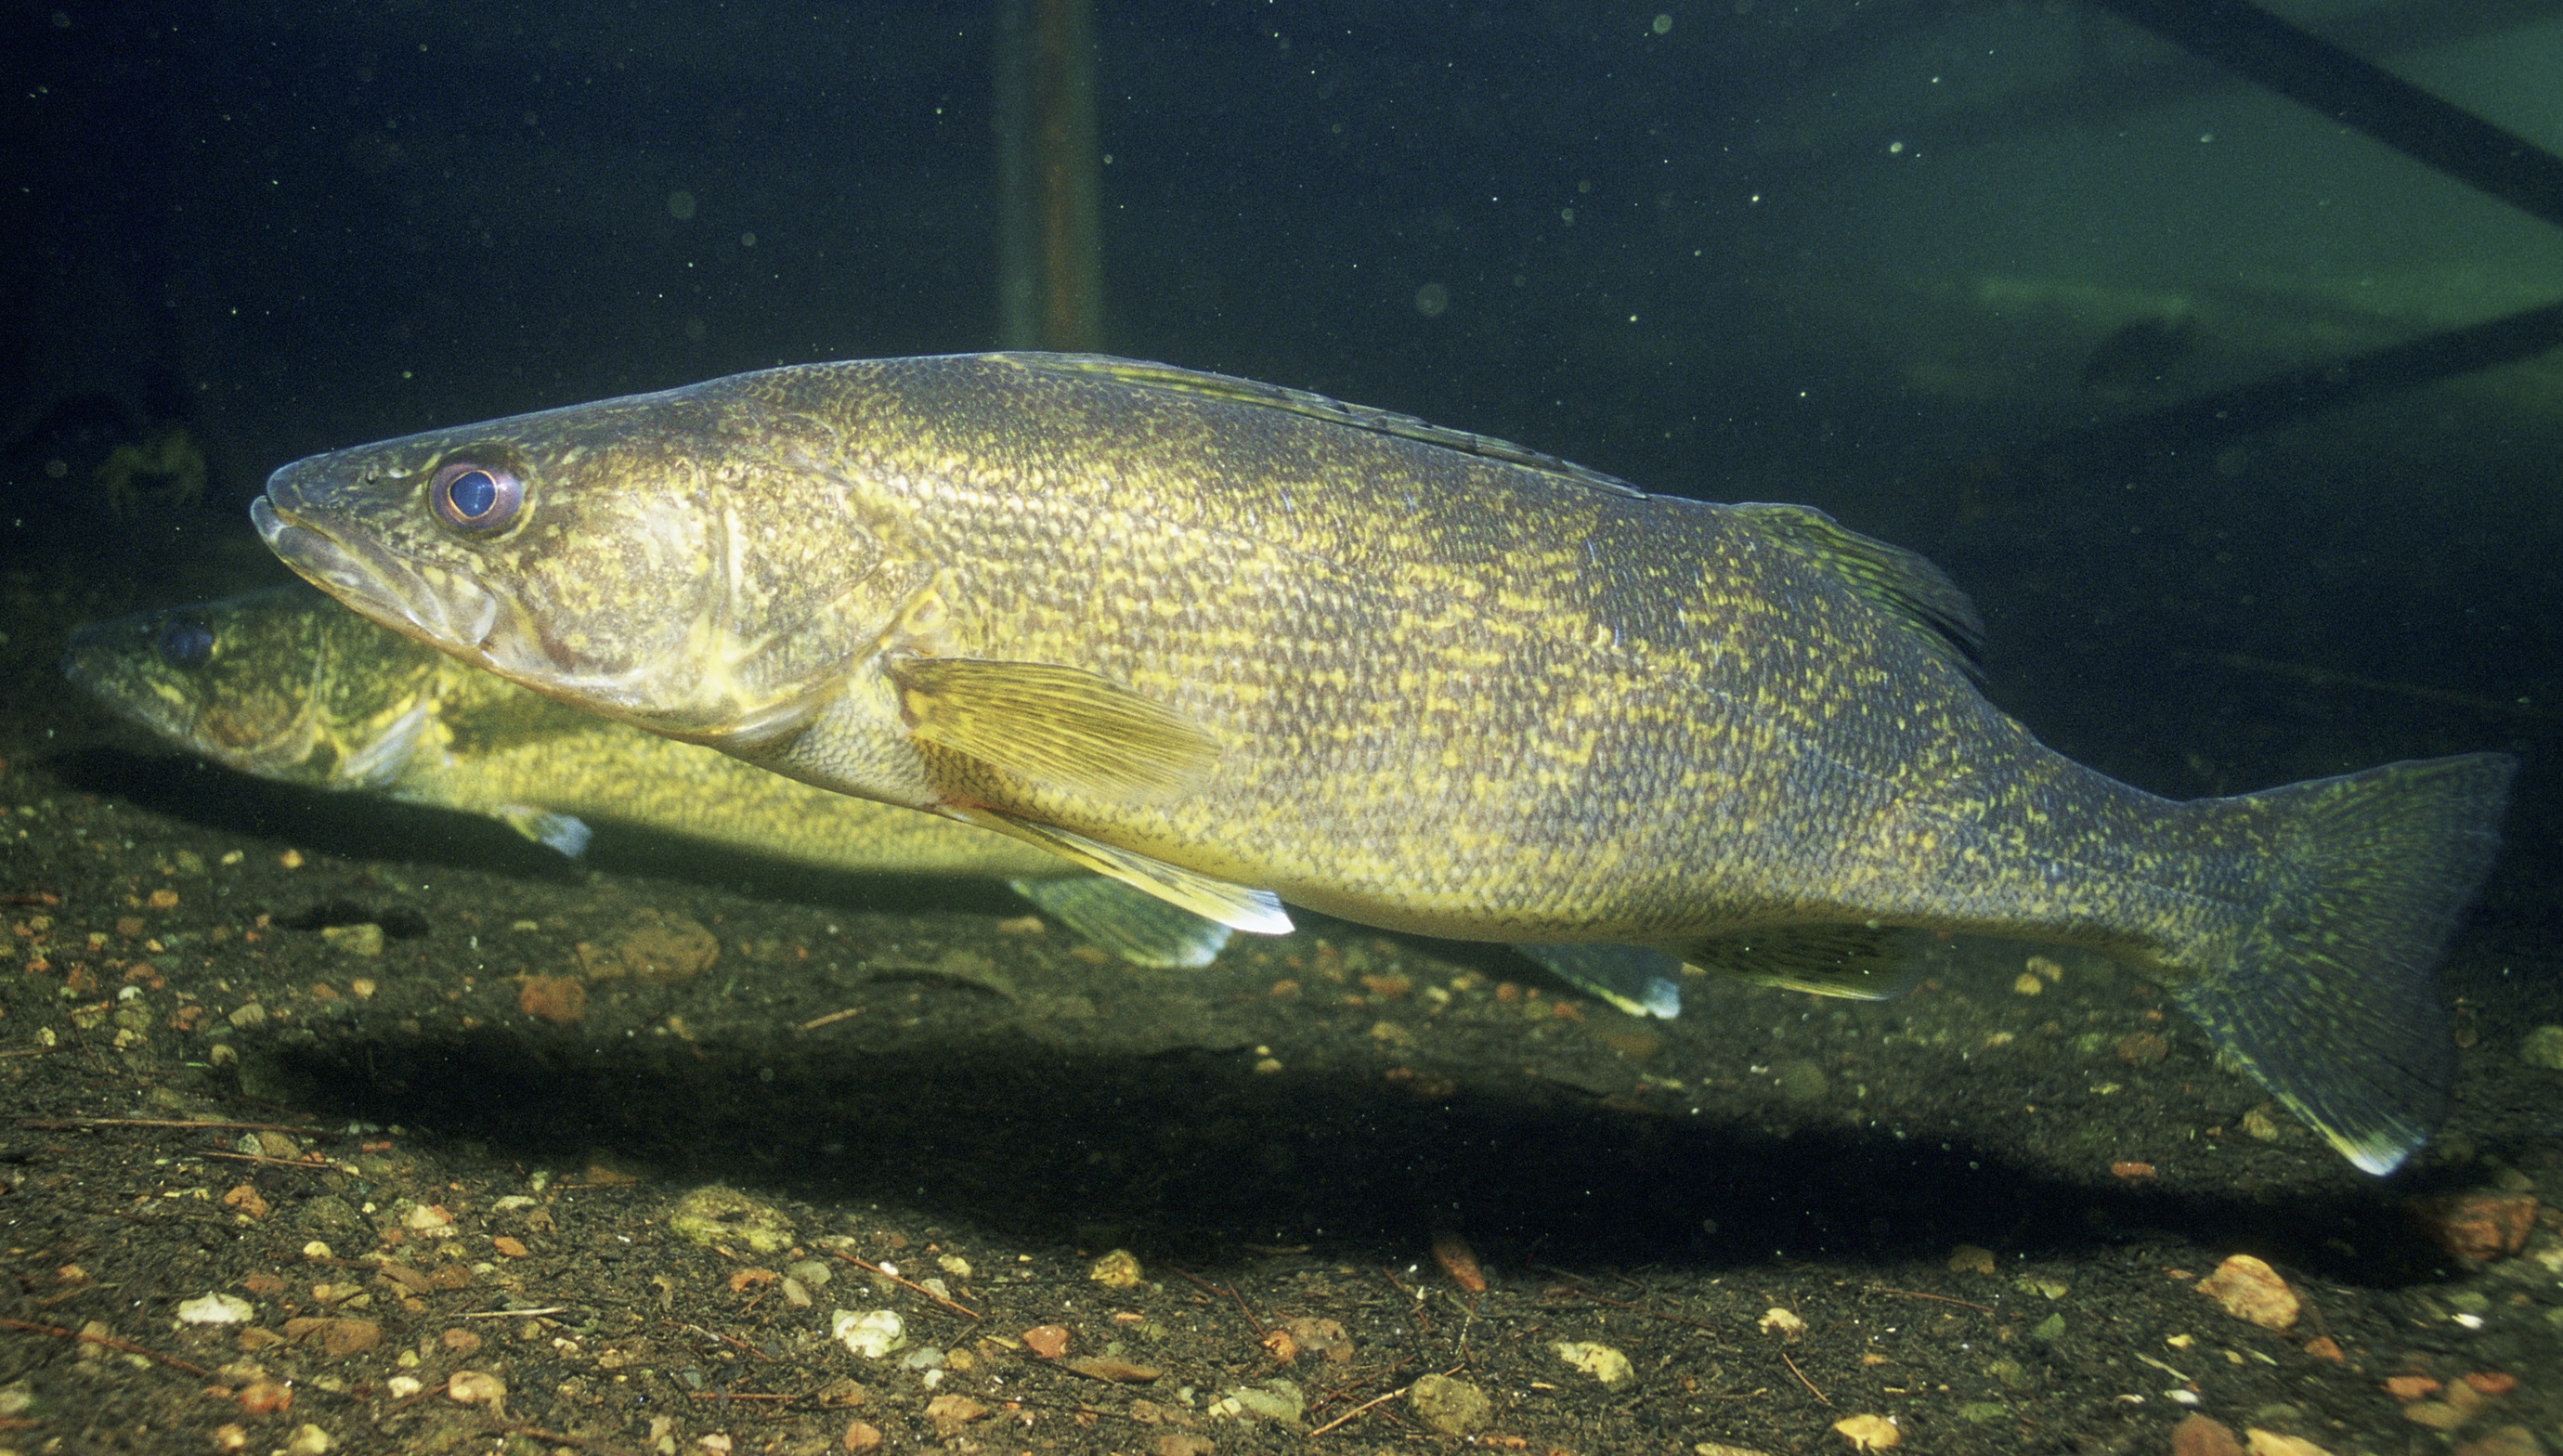 Two walleye fish above a pebbly ground. Their bodies are mottled black and yellowish brown. Their tail and pectoral fins have white tips.